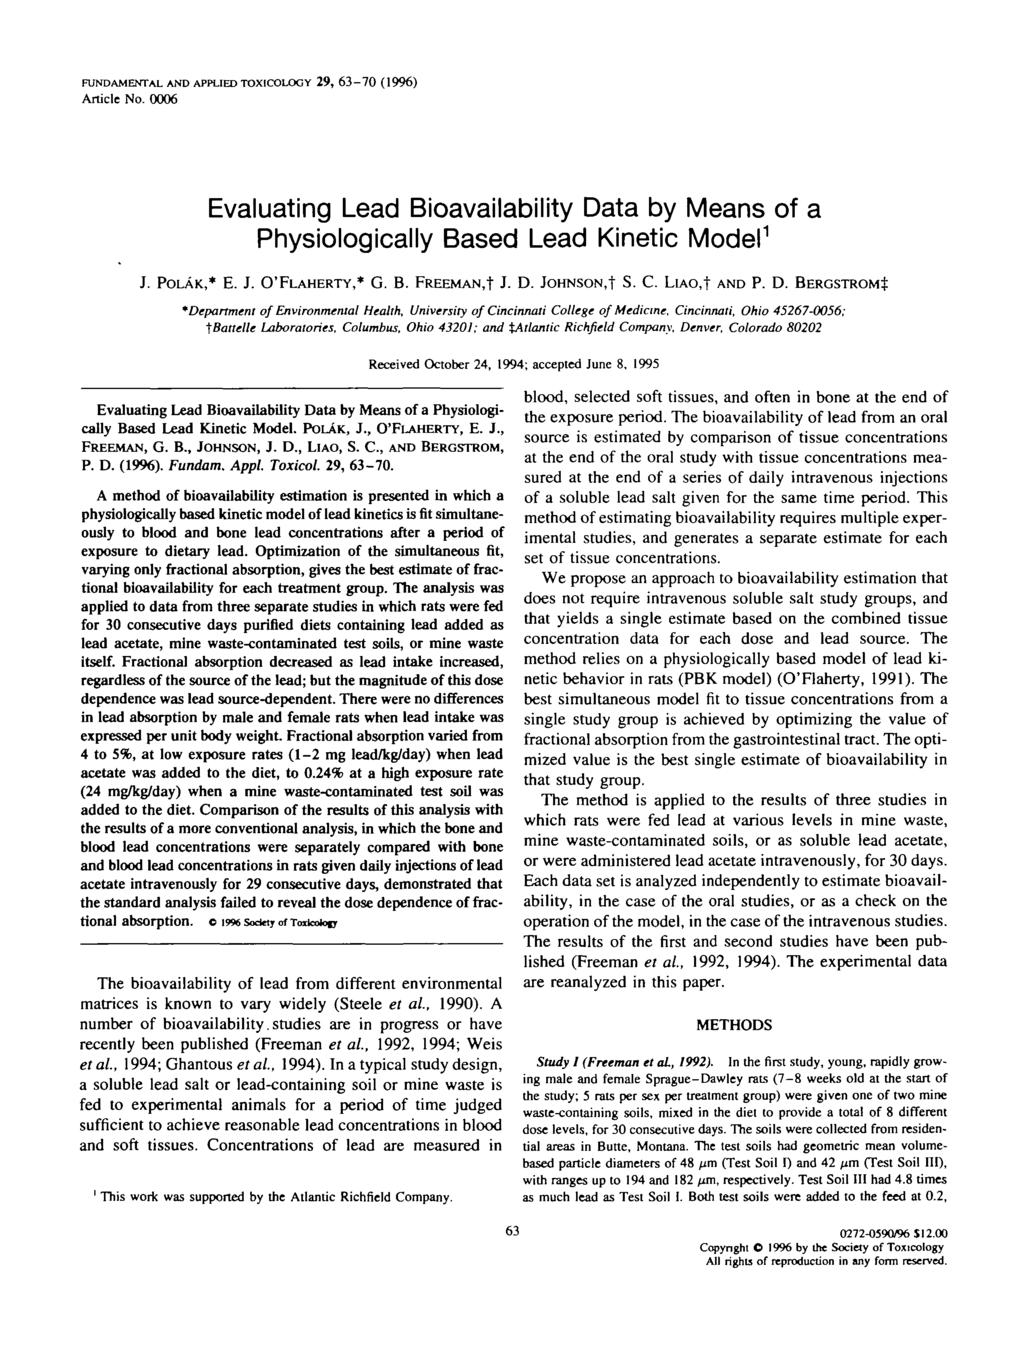 FUNDAMENTAL AND APPLED TOXCOLOGY 29, 63-70 (1996) Artile No. 0006 Evaluating Lead Bioavailaility Data y Means of a Physiologially Based Lead Kineti Model 1 J. POLAK,* E. J. O'FLAHERTY,* G. B. FREEMAN,!